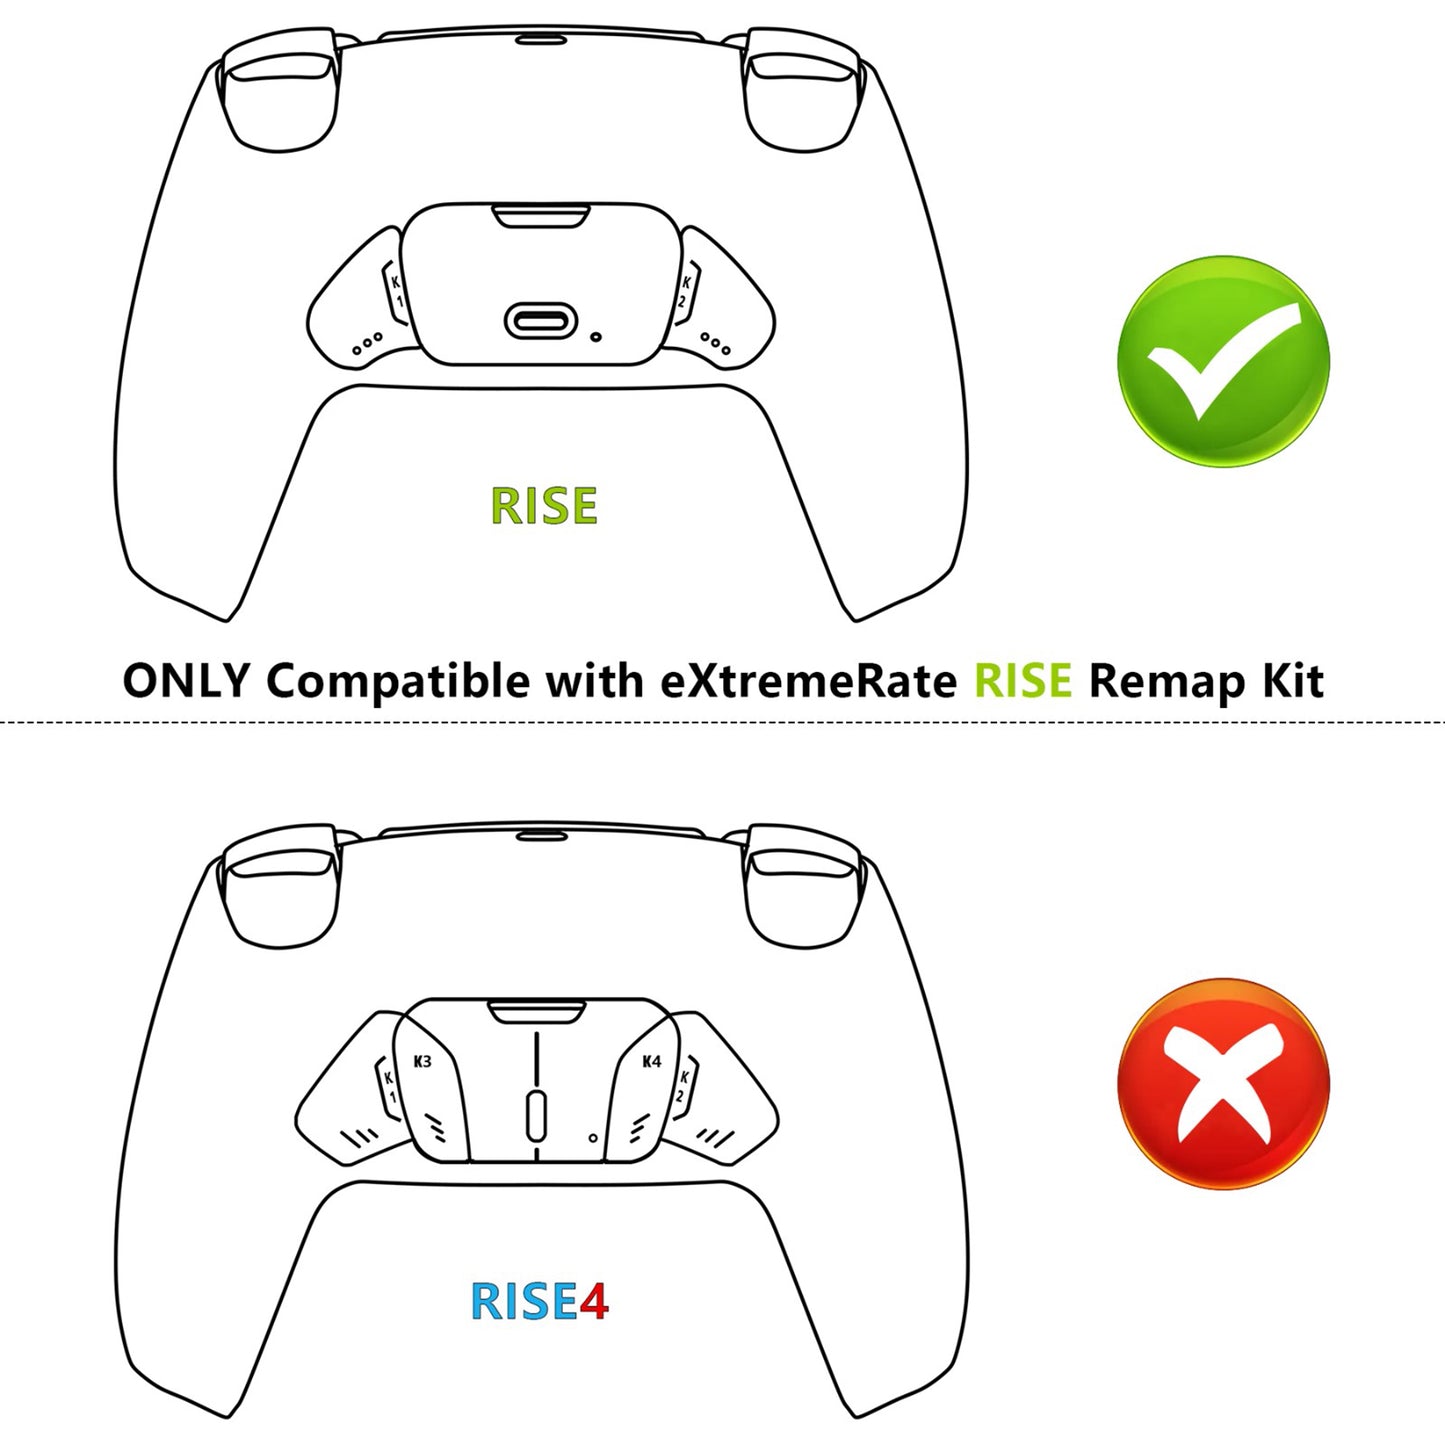 eXtremeRate Replacement Redesigned K1 K2 Back Buttons for eXtremerate RISE Remap Kit, Compatible with PS5 Controller - Chrome Pink eXtremeRate